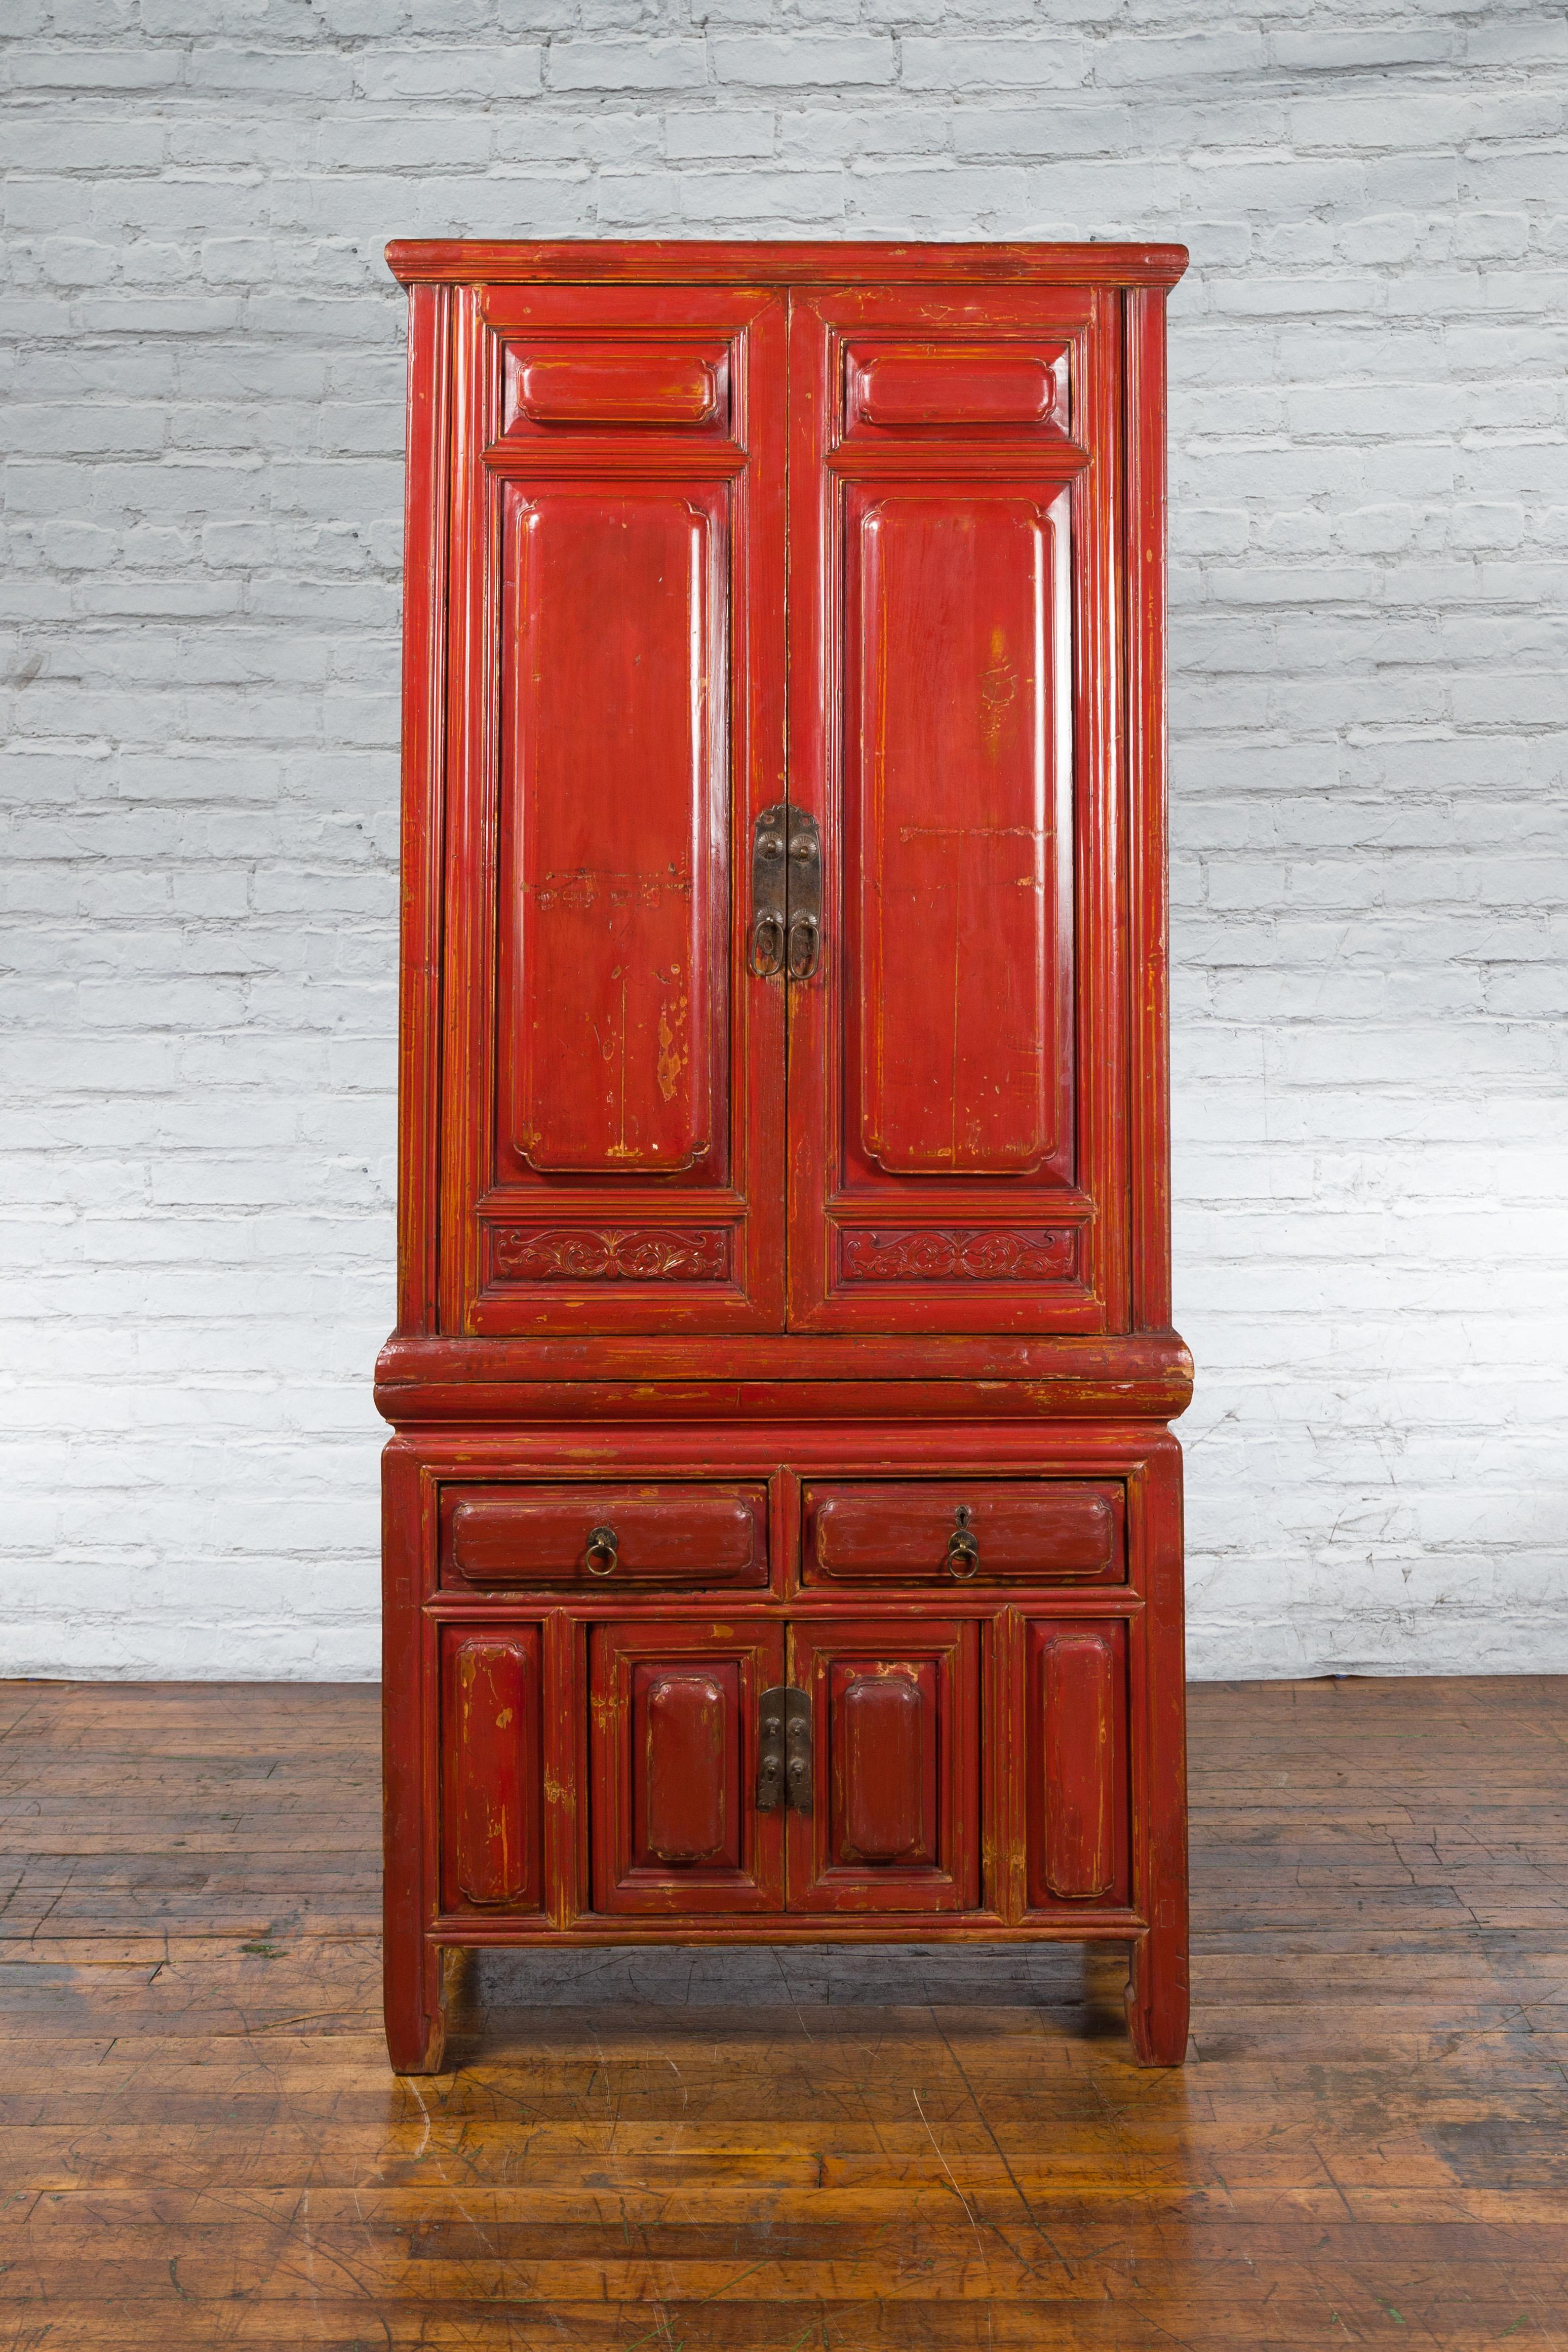 A Chinese late Qing Dynasty period red lacquered compound cabinet from the early 20th century, with raised panels and carved friezes. Created in China during the late period of the Qing Dynasty in the early 20th century, this compound cabinet